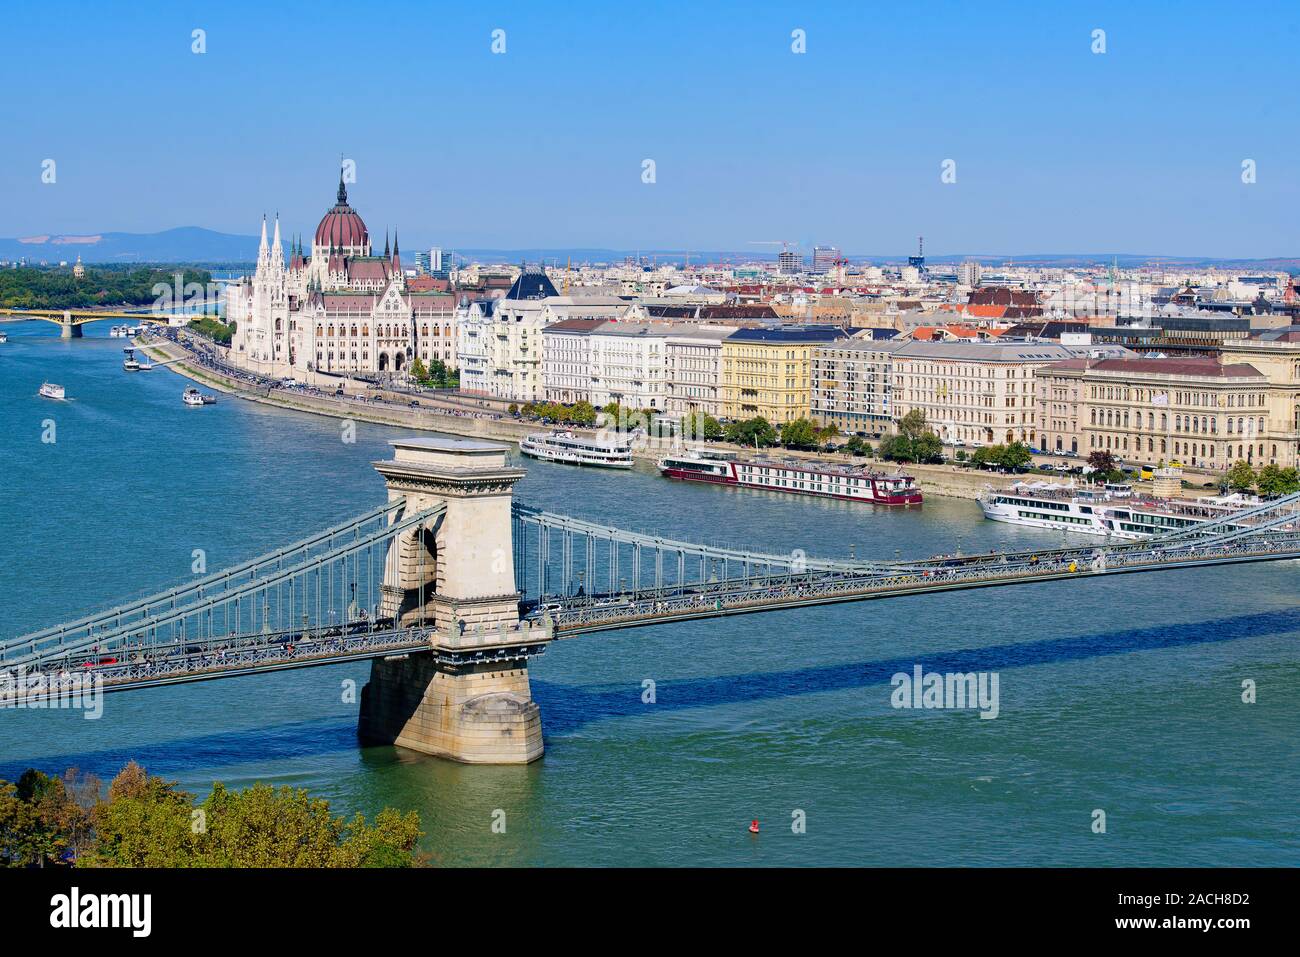 Panorama of Hungarian Parliament Building, Széchenyi Chain Bridge, and River Danube in Budapest, Hungary Stock Photo